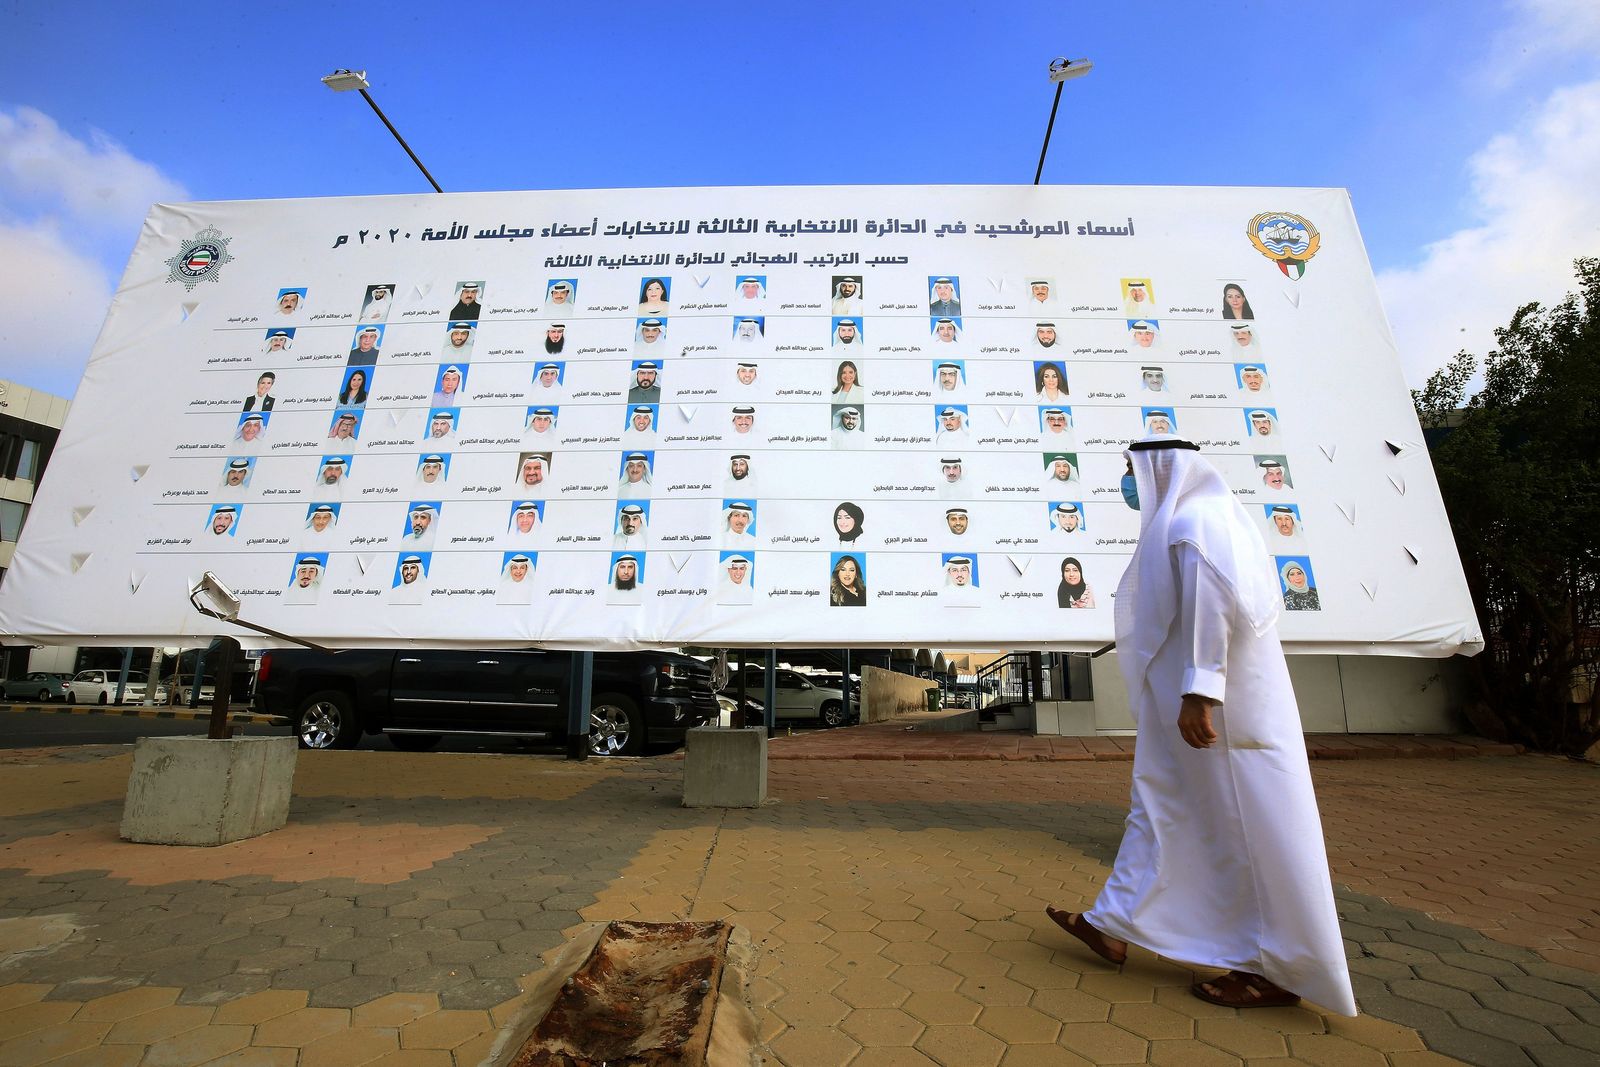 A Kuwaiti man walks by a billboard featuring the candidates running for parliamentary elections in Kuwait City, on November 30, 2020. - Kuwait's National Assembly elections are scheduled for December 5, 2020. (Photo by YASSER AL-ZAYYAT / AFP) - AFP